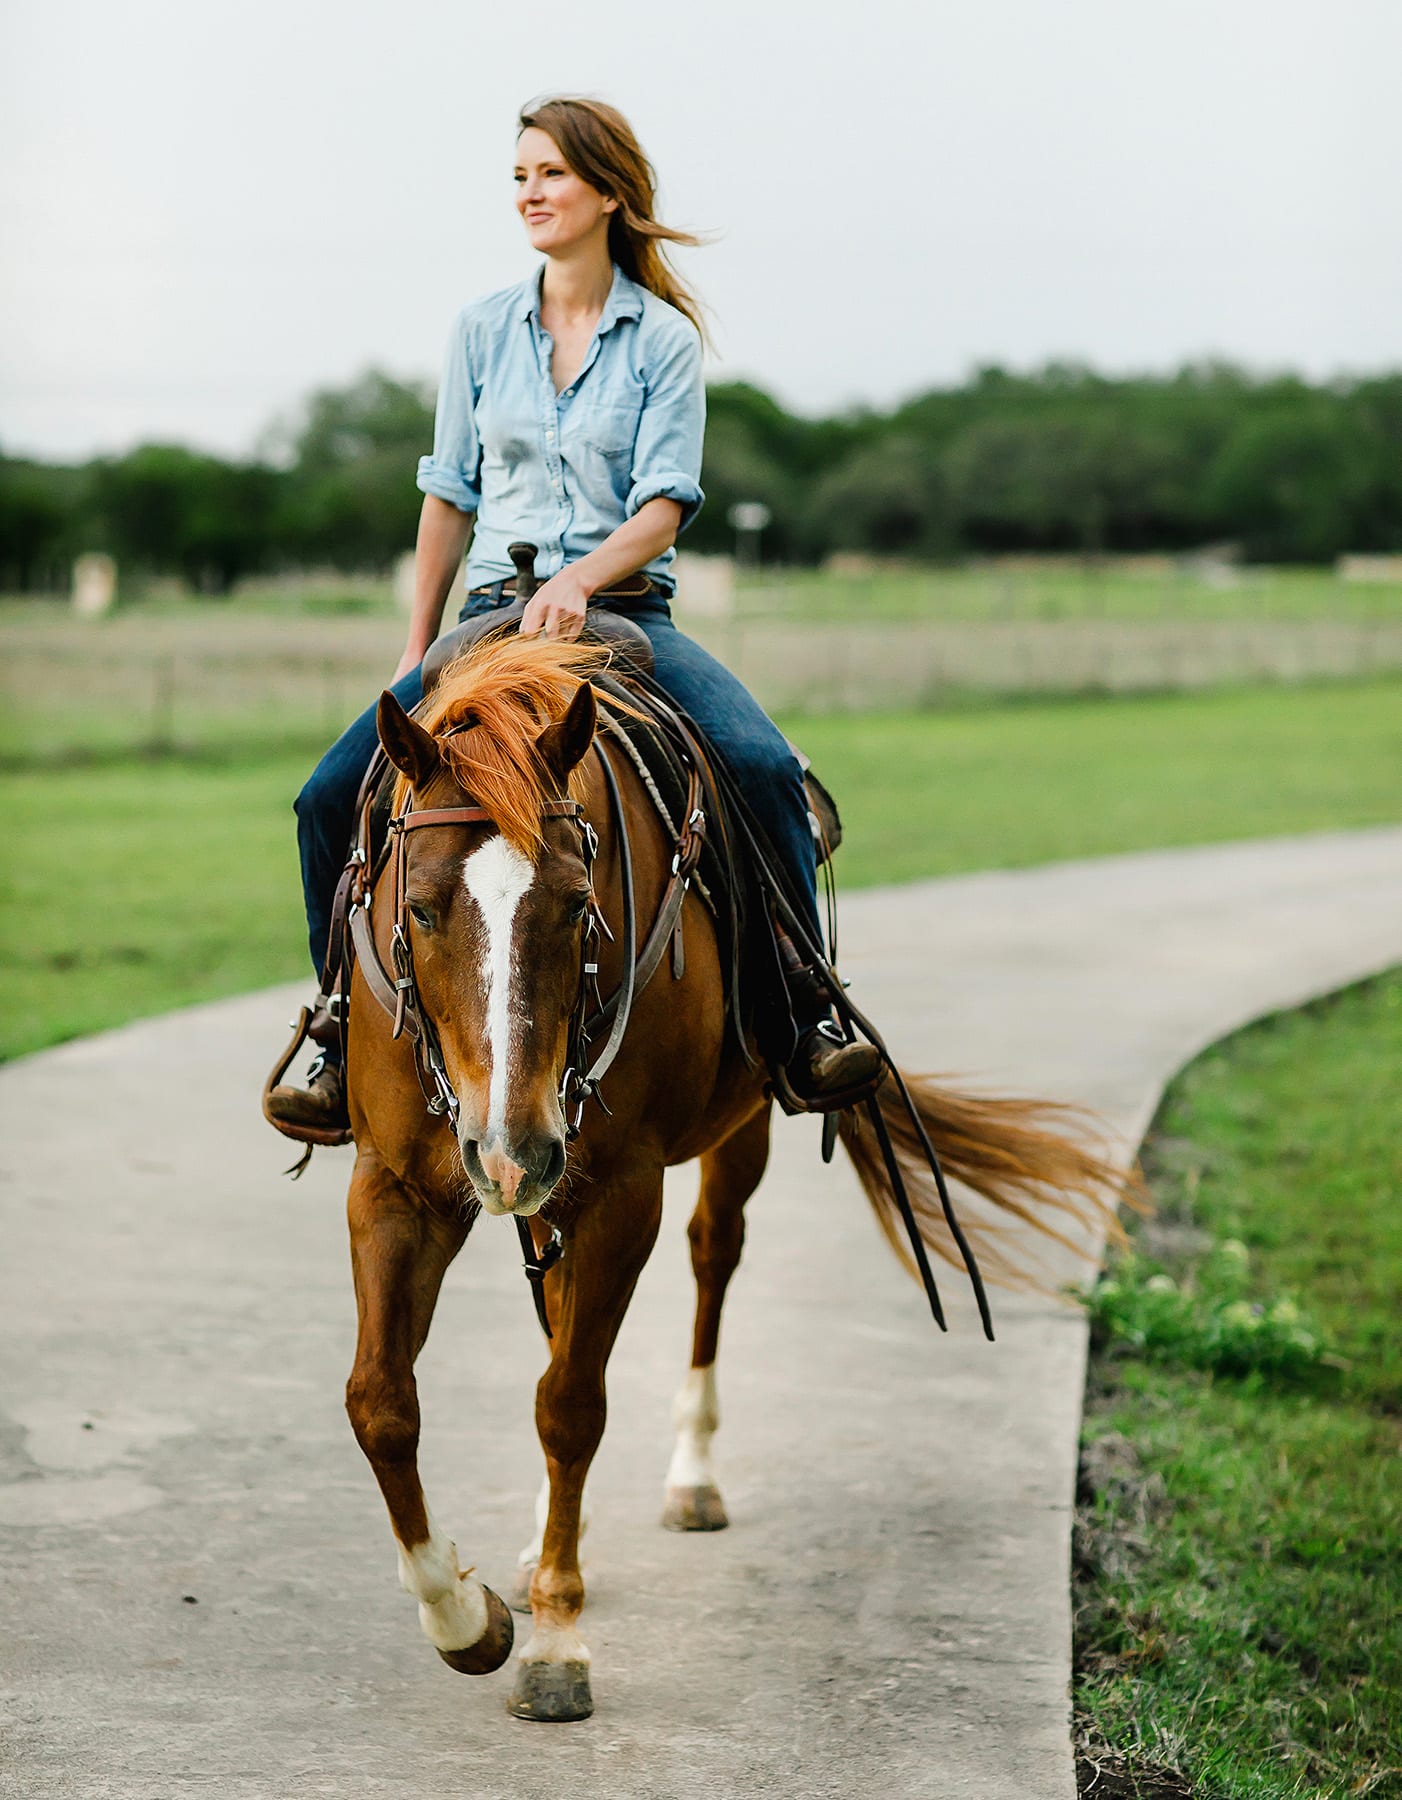 Sigrid riding her quarter horse in Driftwood, Texas